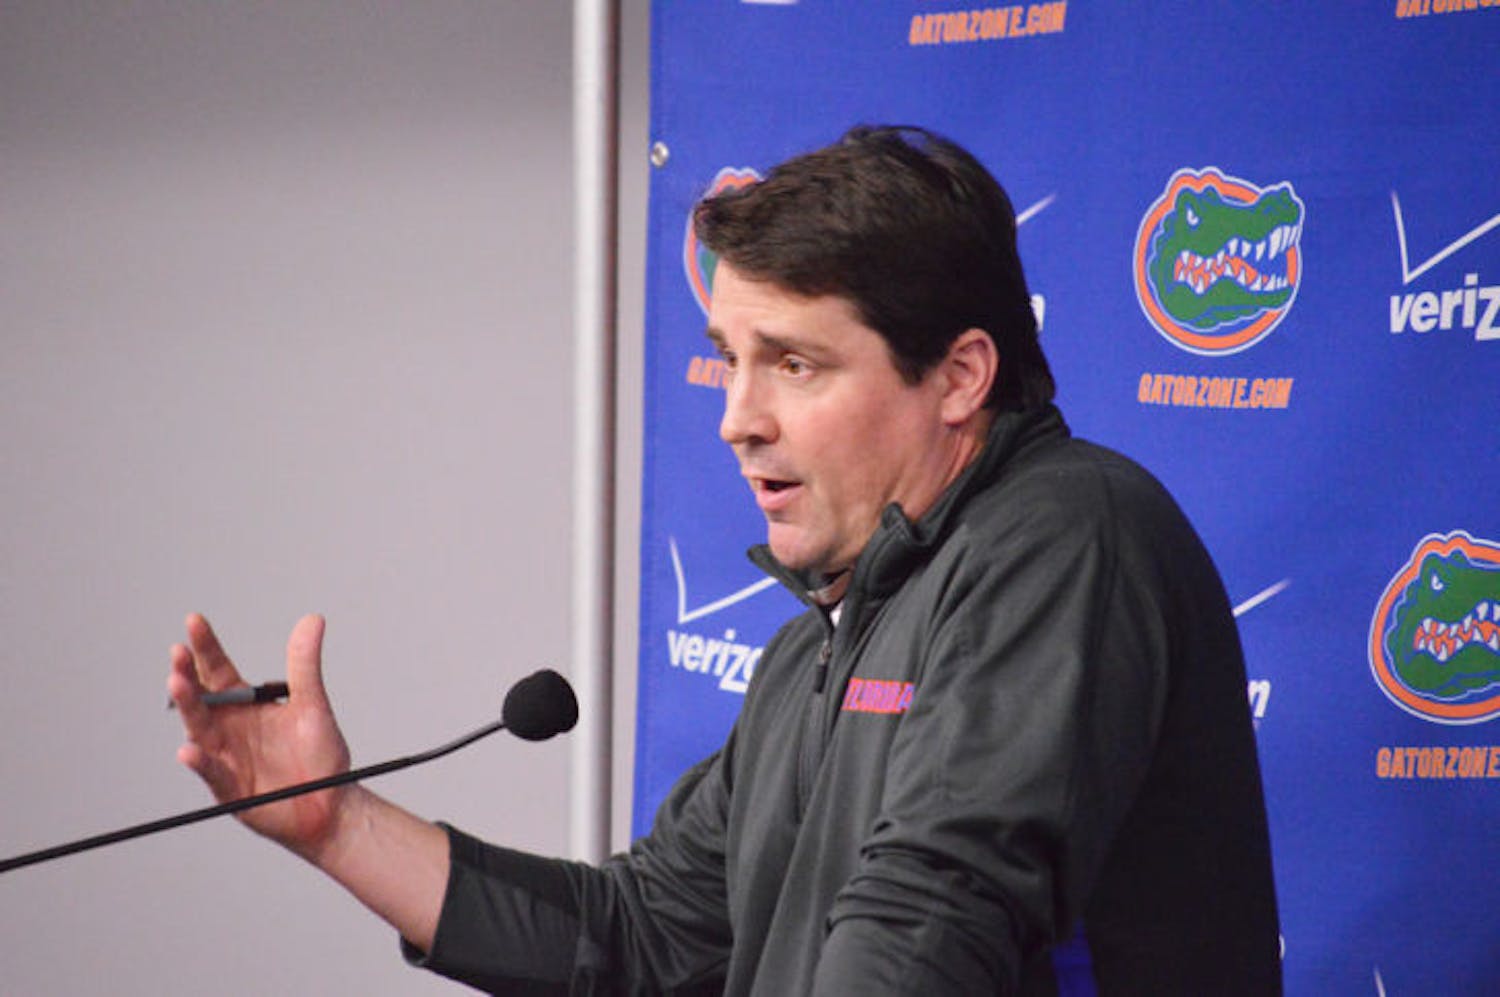 Will Muschamp speaks at a press conference in Ben Hill Griffin Stadium on Jan. 13. UF hosted Friday Night Lights on Friday for its top prospects.
&nbsp;